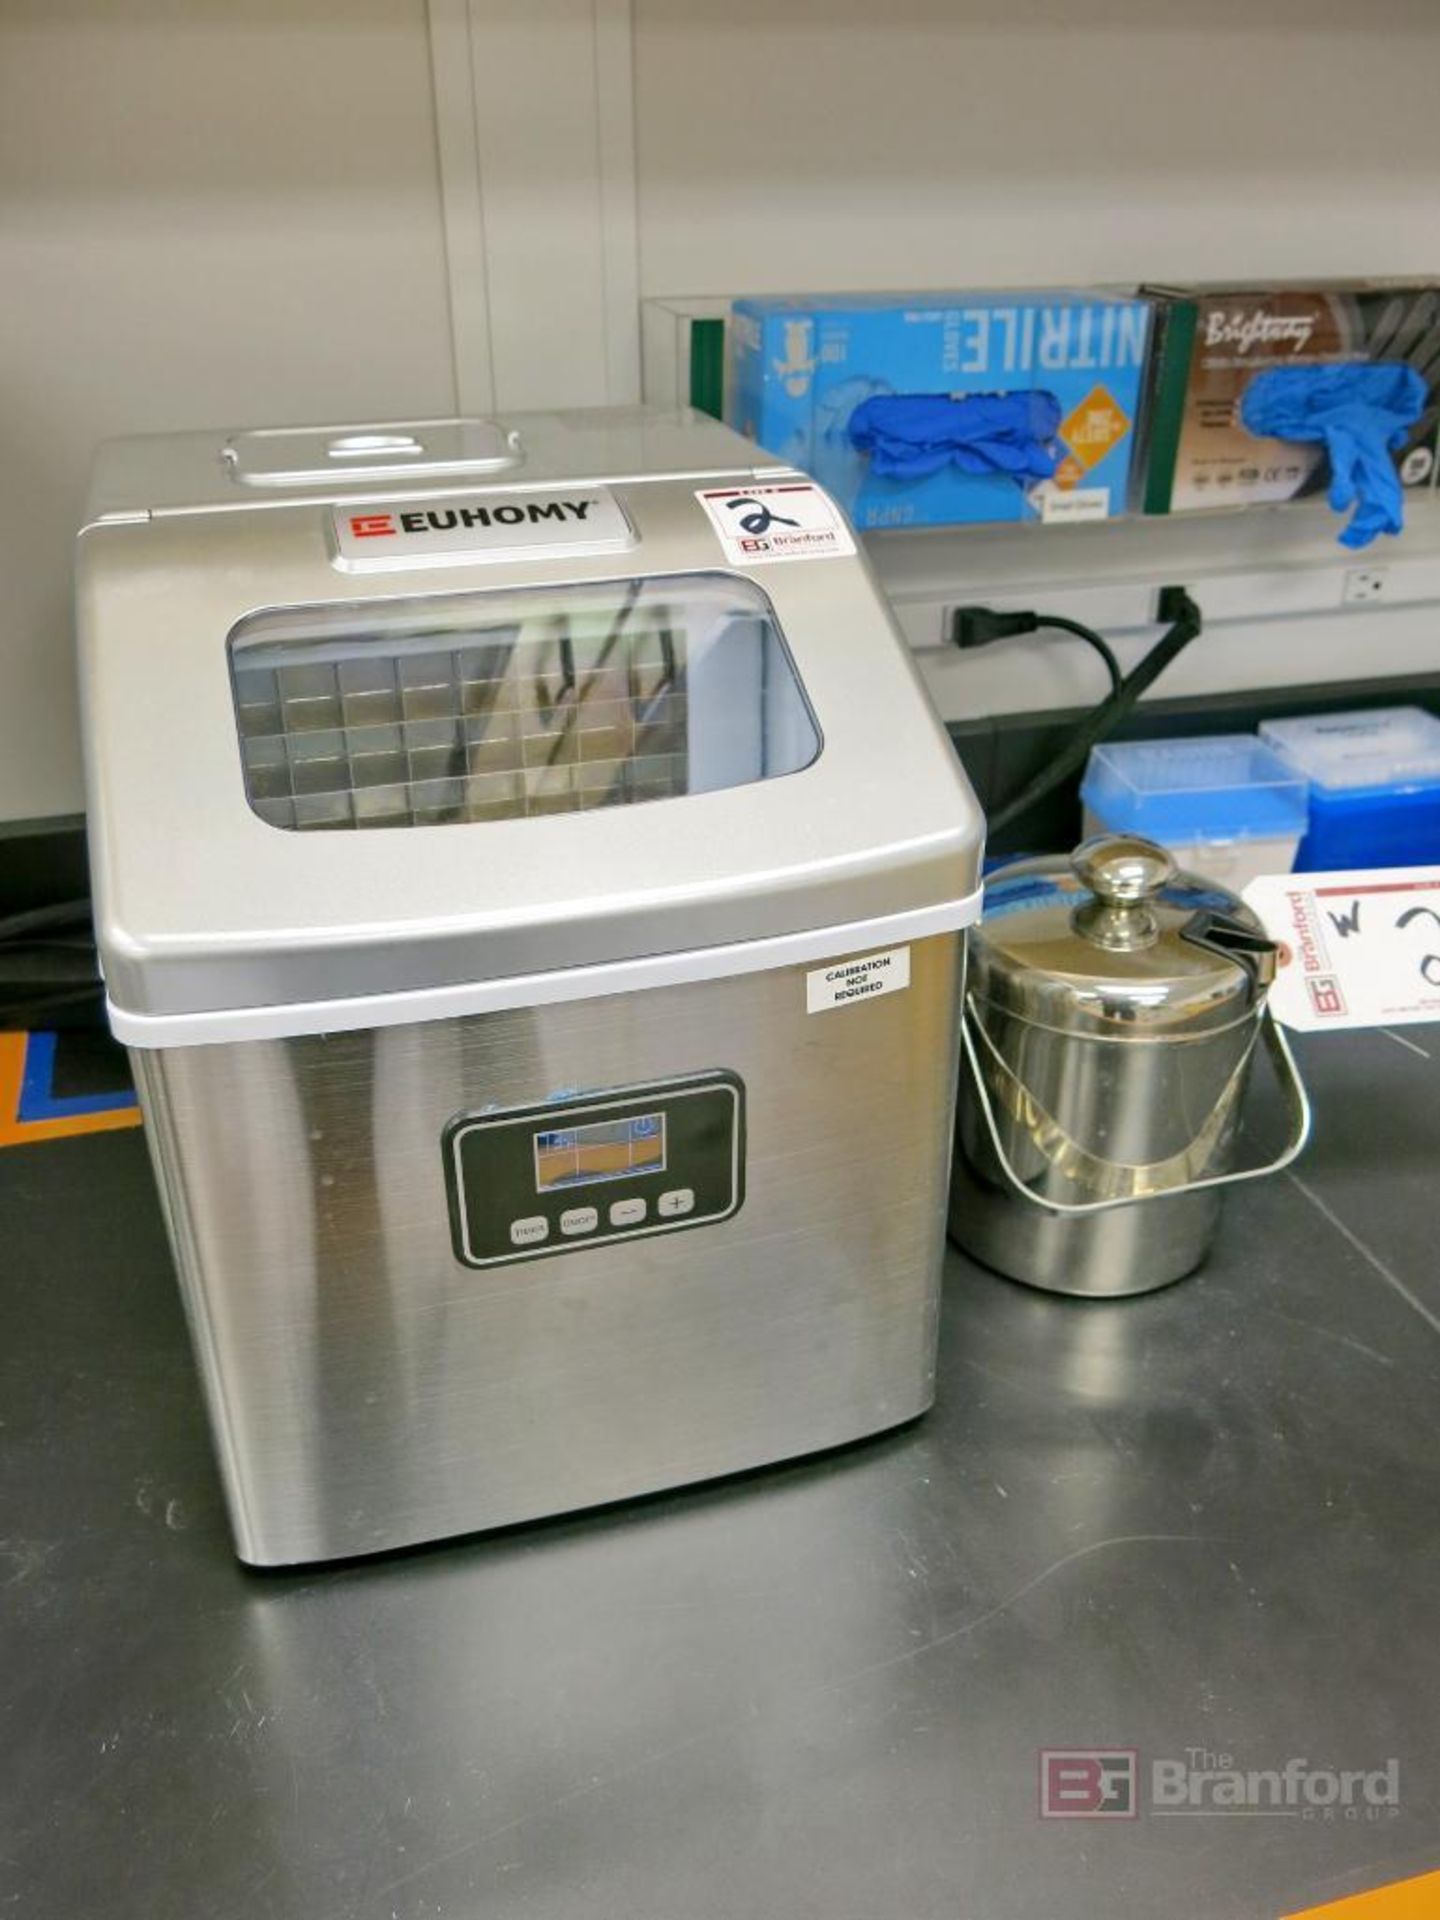 Euhomy Model IM-F Electric Icemaker - Image 2 of 3